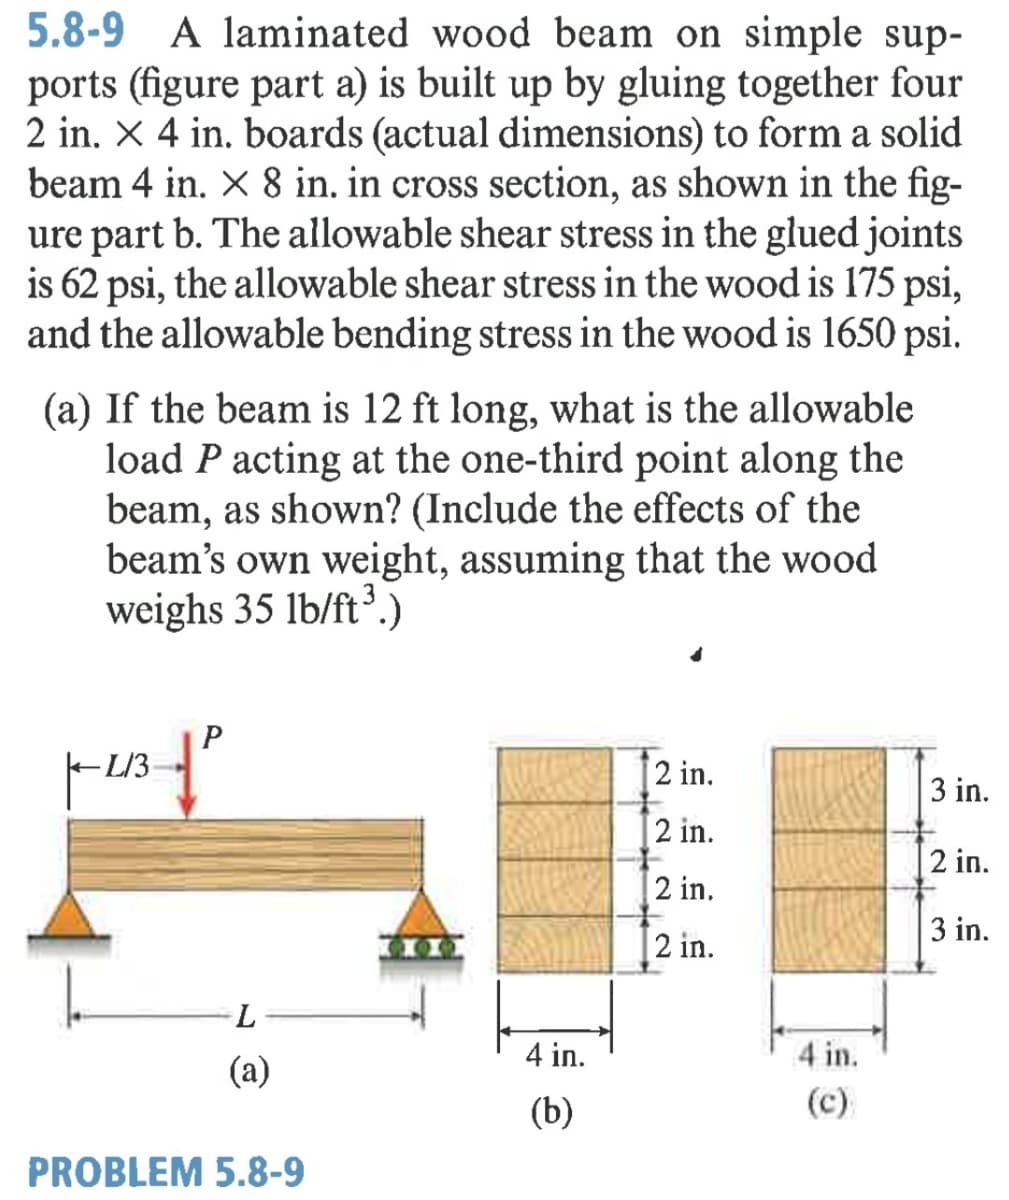 5.8-9 A laminated wood beam on simple sup-
ports (figure part a) is built up by gluing together four
2 in. X 4 in. boards (actual dimensions) to form a solid
beam 4 in. X 8 in. in cross section, as shown in the fig-
ure part b. The allowable shear stress in the glued joints
is 62 psi, the allowable shear stress in the wood is 175 psi,
and the allowable bending stress in the wood is 1650 psi.
(a) If the beam is 12 ft long, what is the allowable
load P acting at the one-third point along the
beam, as shown? (Include the effects of the
beam's own weight, assuming that the wood
weighs 35 lb/ft³.)
shutter
2 in.
L/3
2 in.
3 in.
2 in.
2 in.
3 in.
2 in.
(a)
4 in.
4 in.
(b)
(c)
PROBLEM 5.8-9
